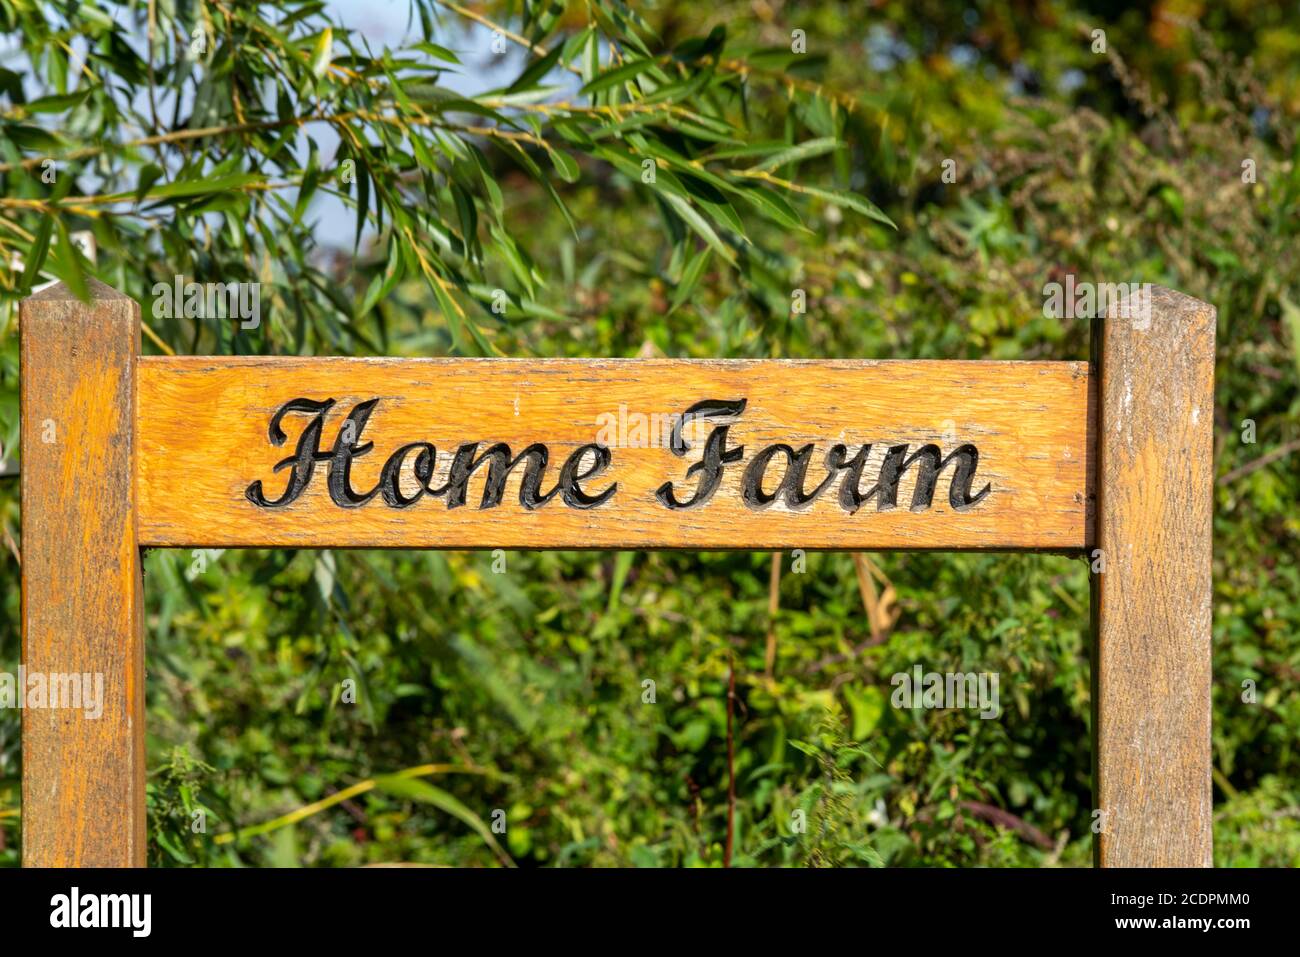 Home Farm sign in Great Wakering, near Southend, Essex, UK. Wooden farm business sign in rural setting. Countryside Stock Photo